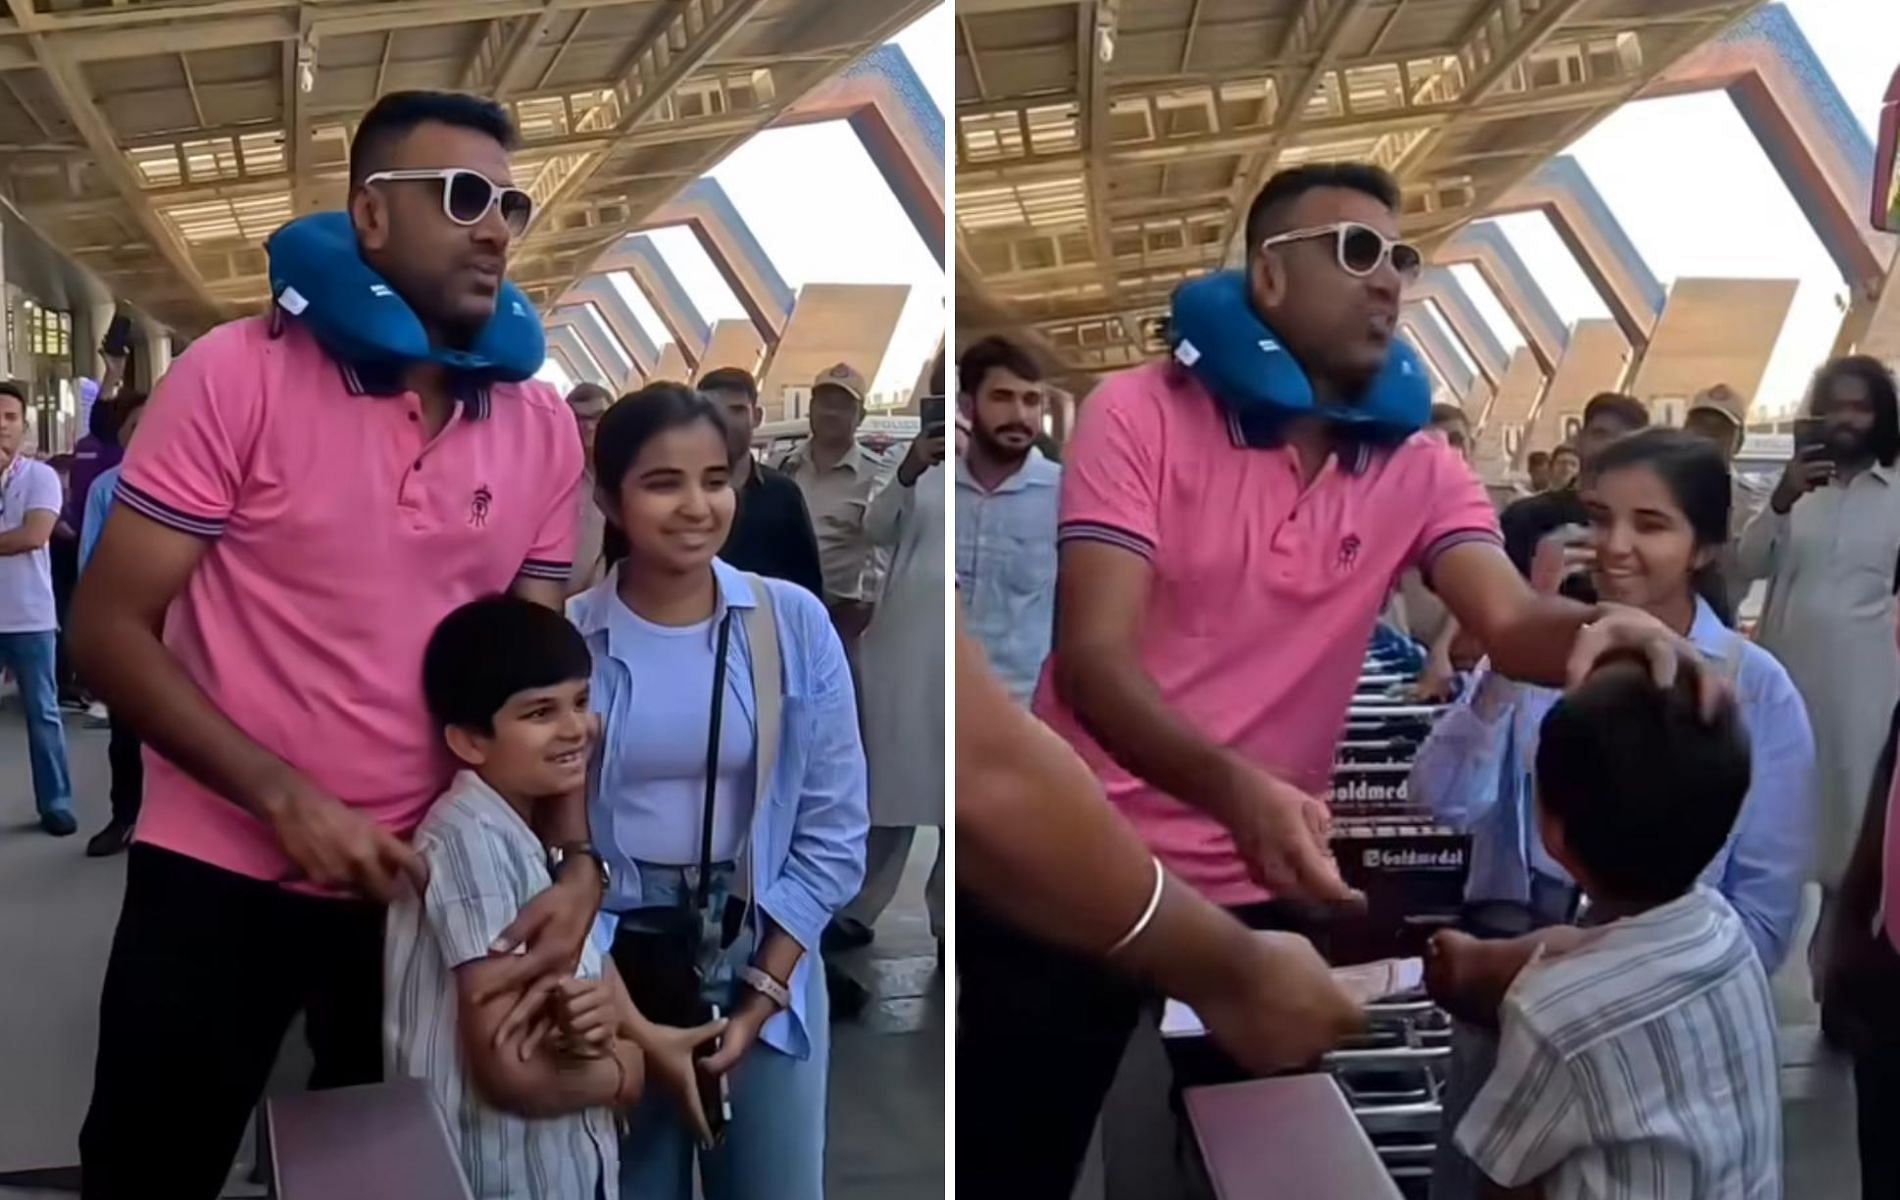 Ravichandran Ashwin posed for pictures with fans at the airport.